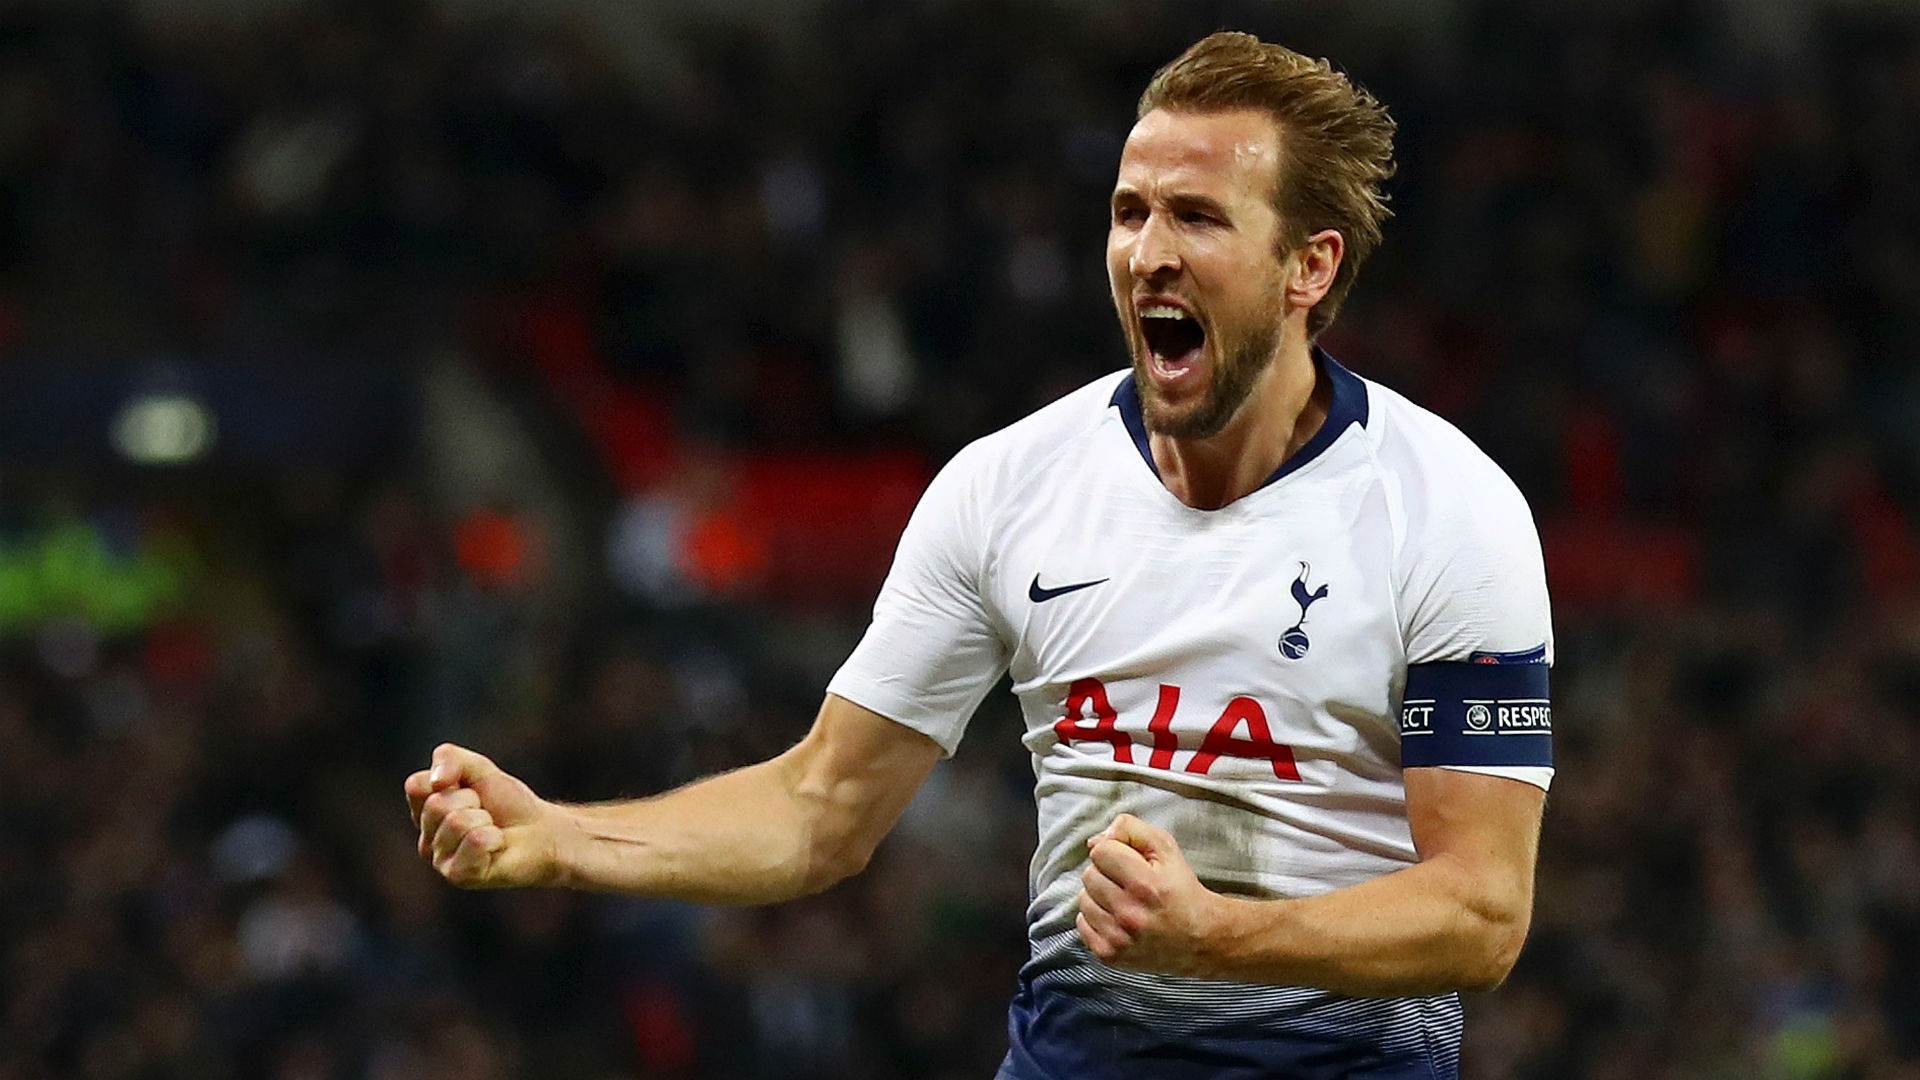 Harry Kane has scored four goals in three games.